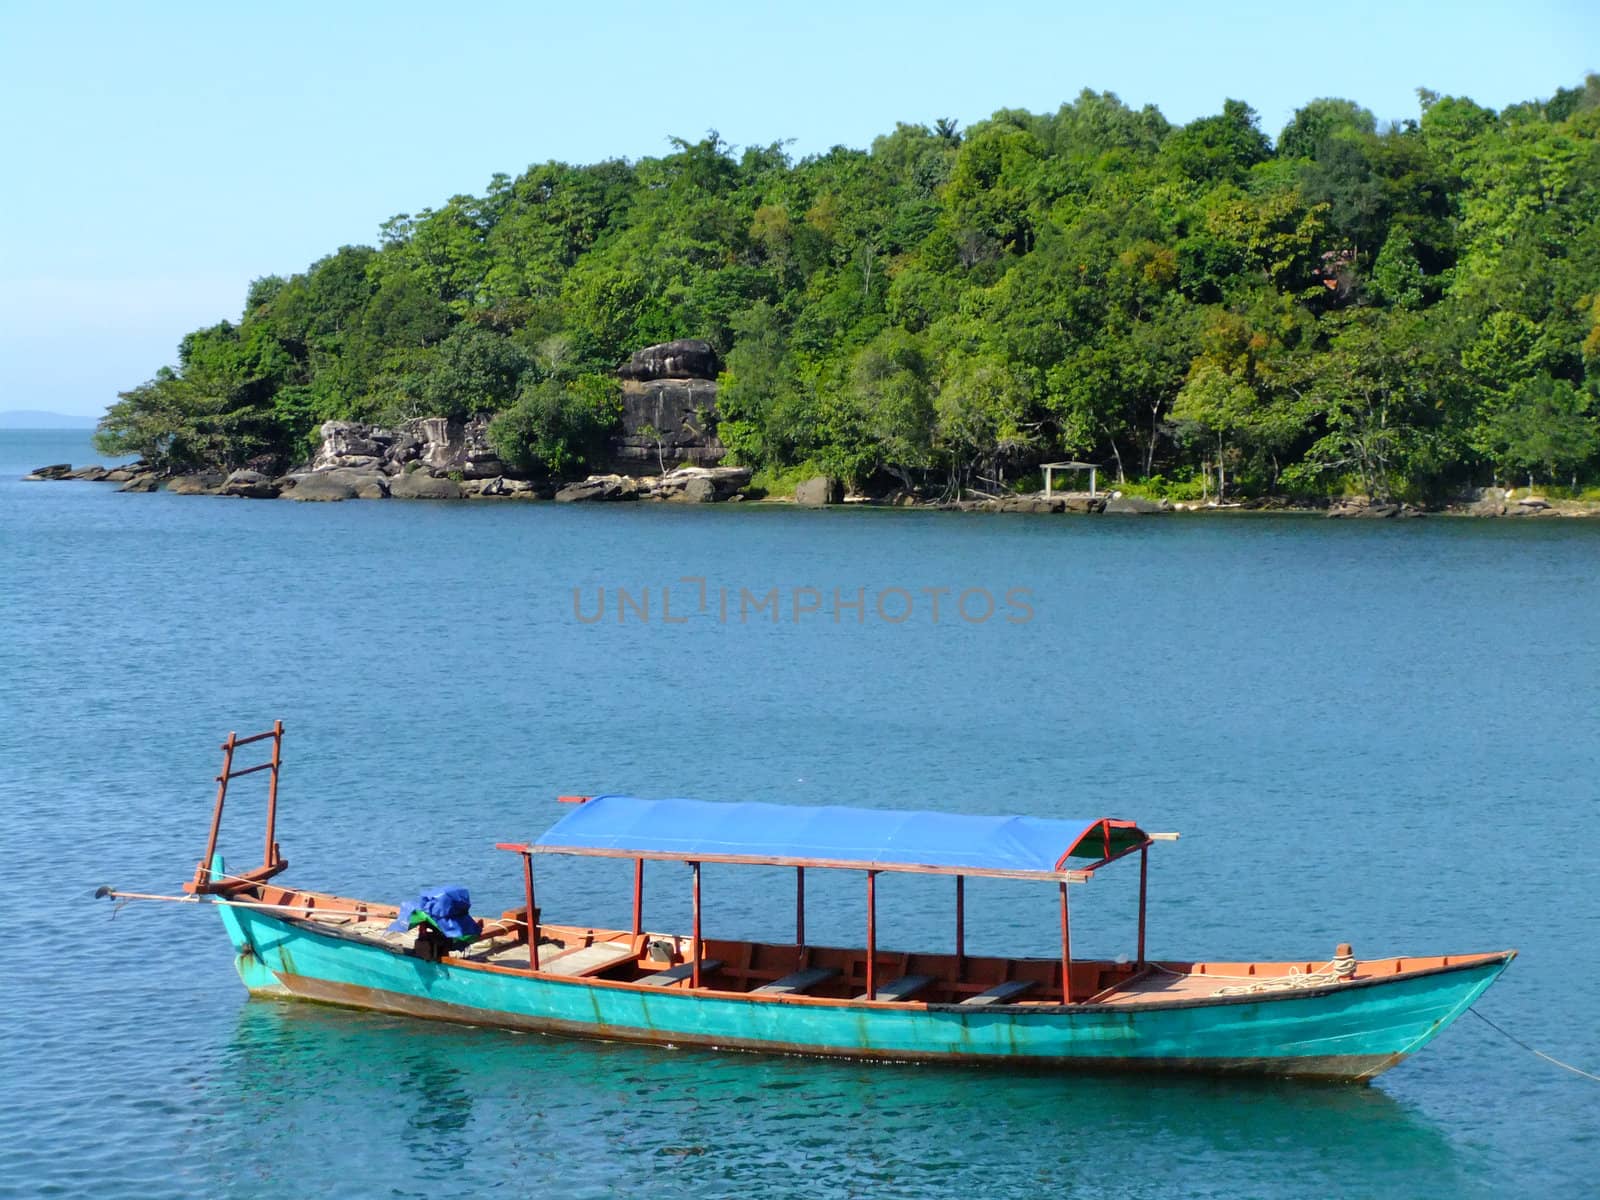 Traditional wooden boat, Sihanoukville, Cambodia by donya_nedomam